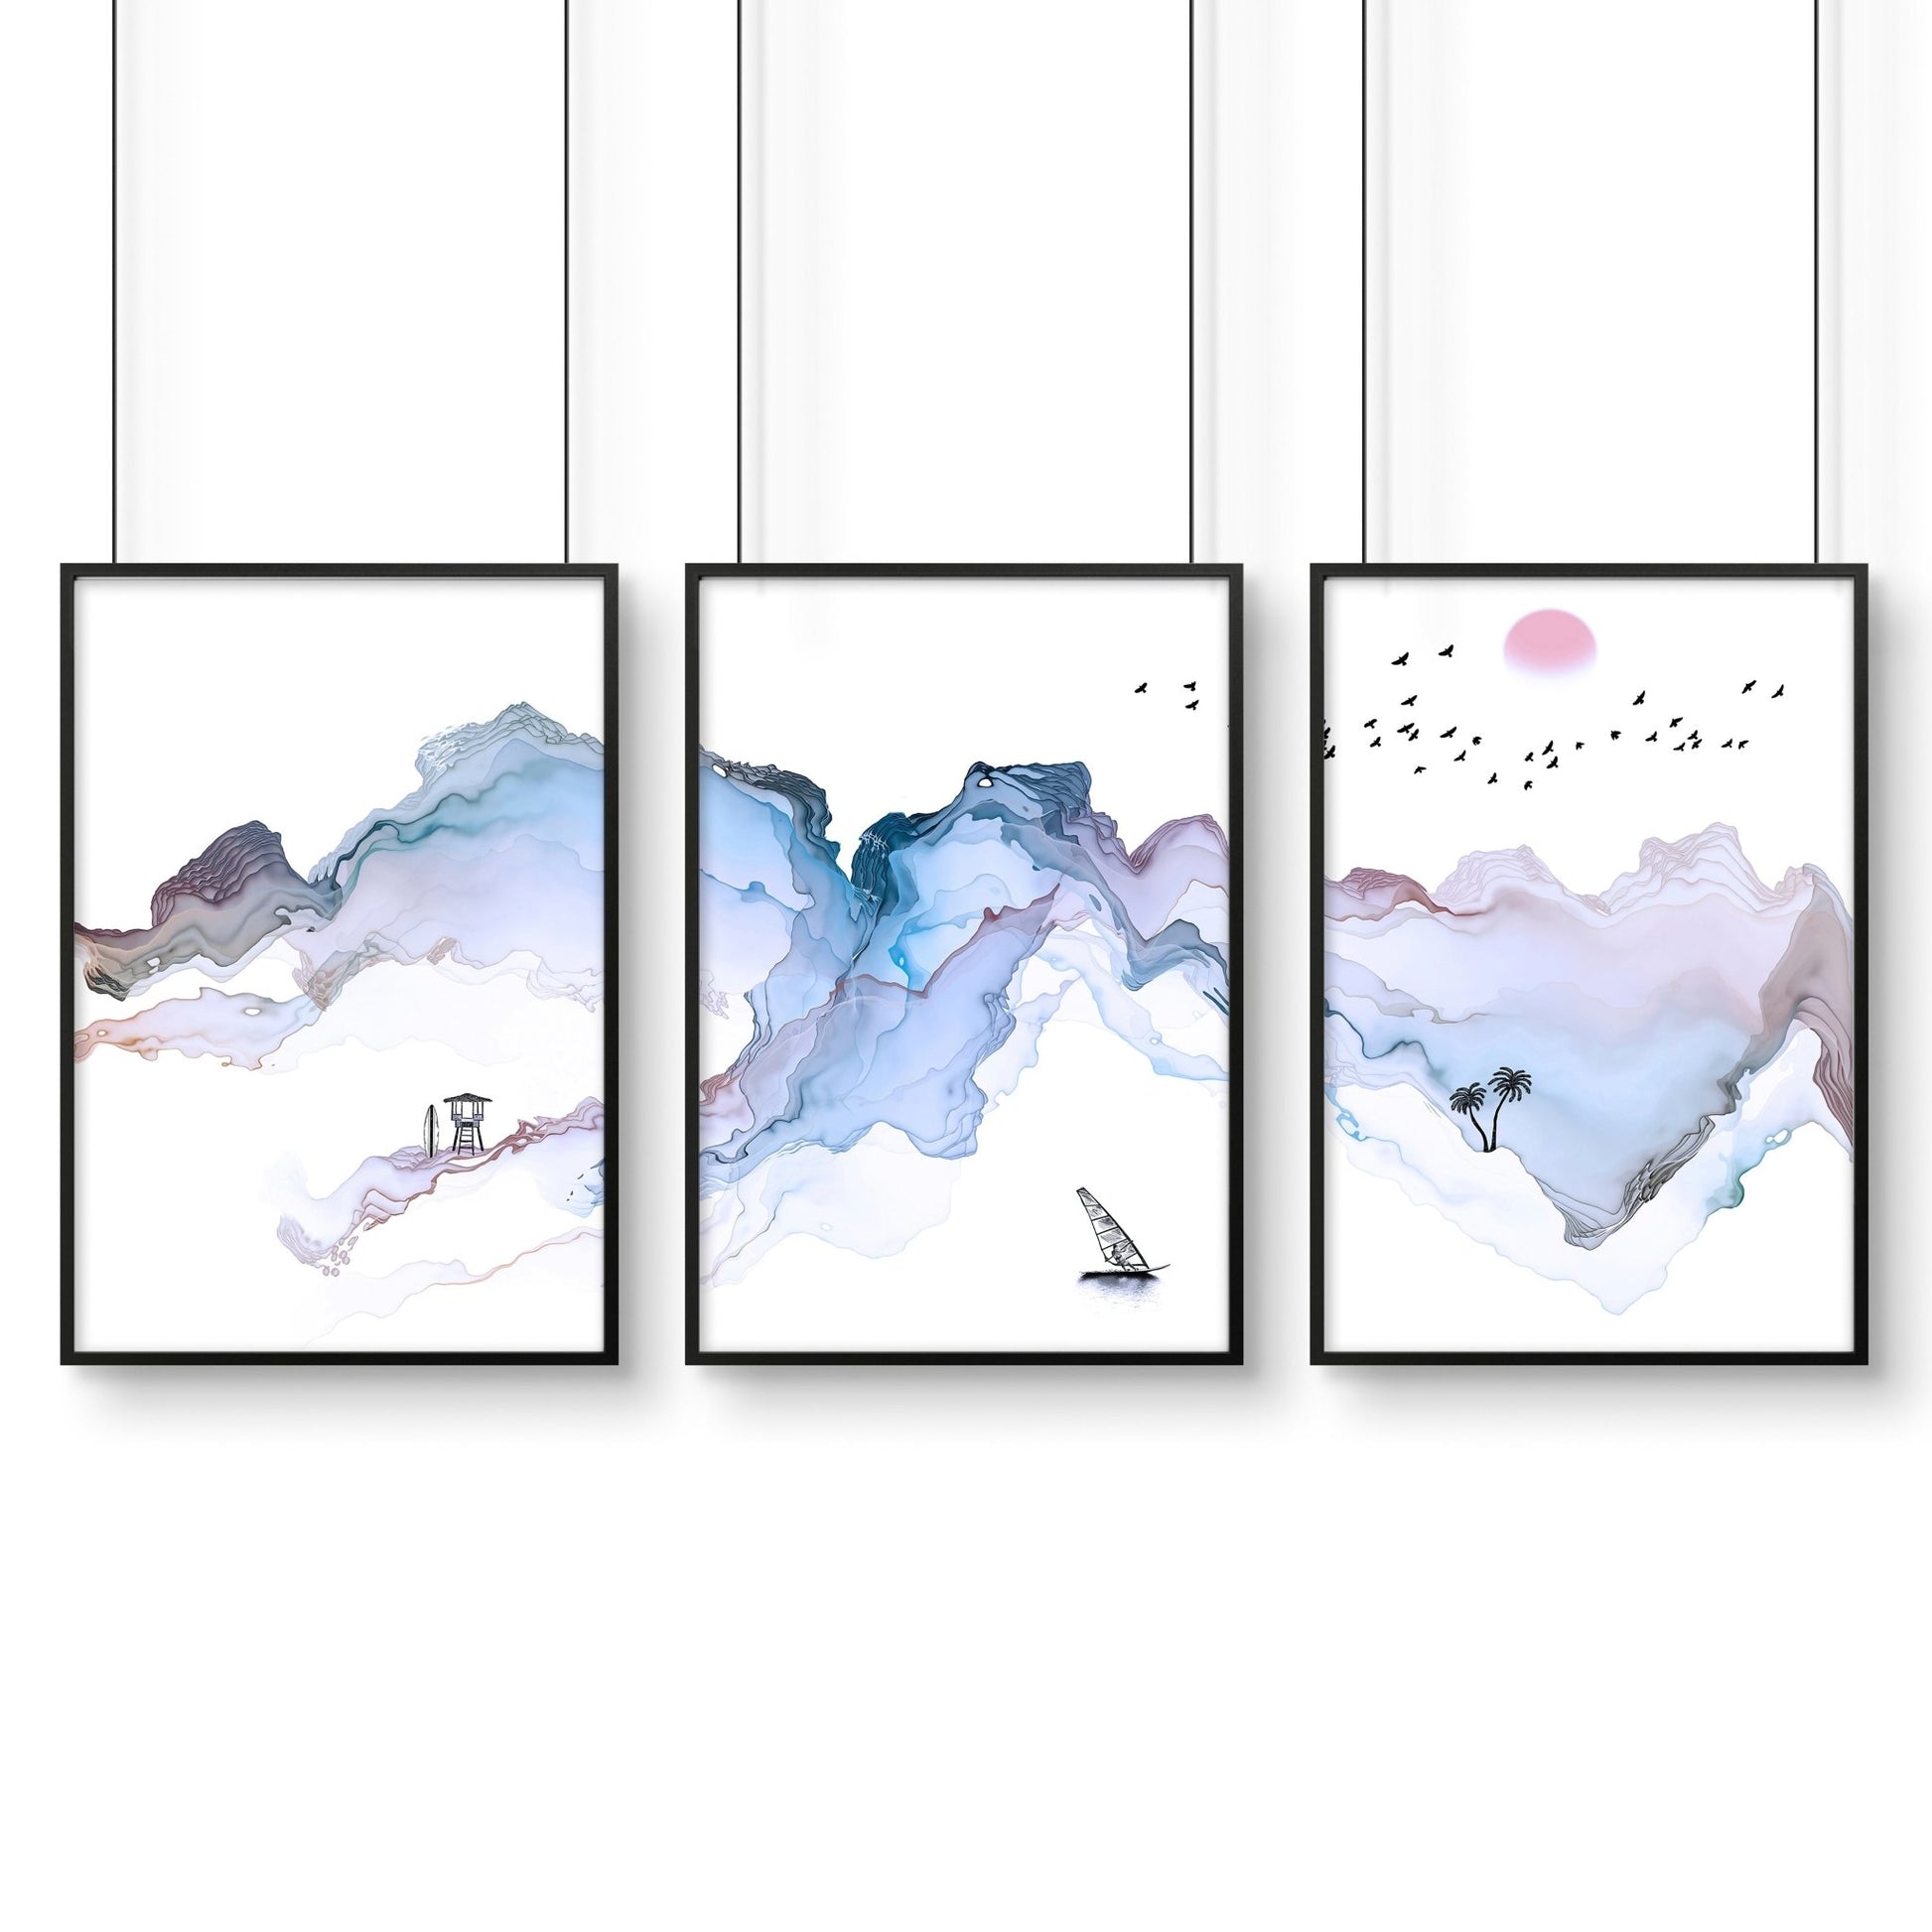 Coast art - Set of 3 wall picture prints - About Wall Art